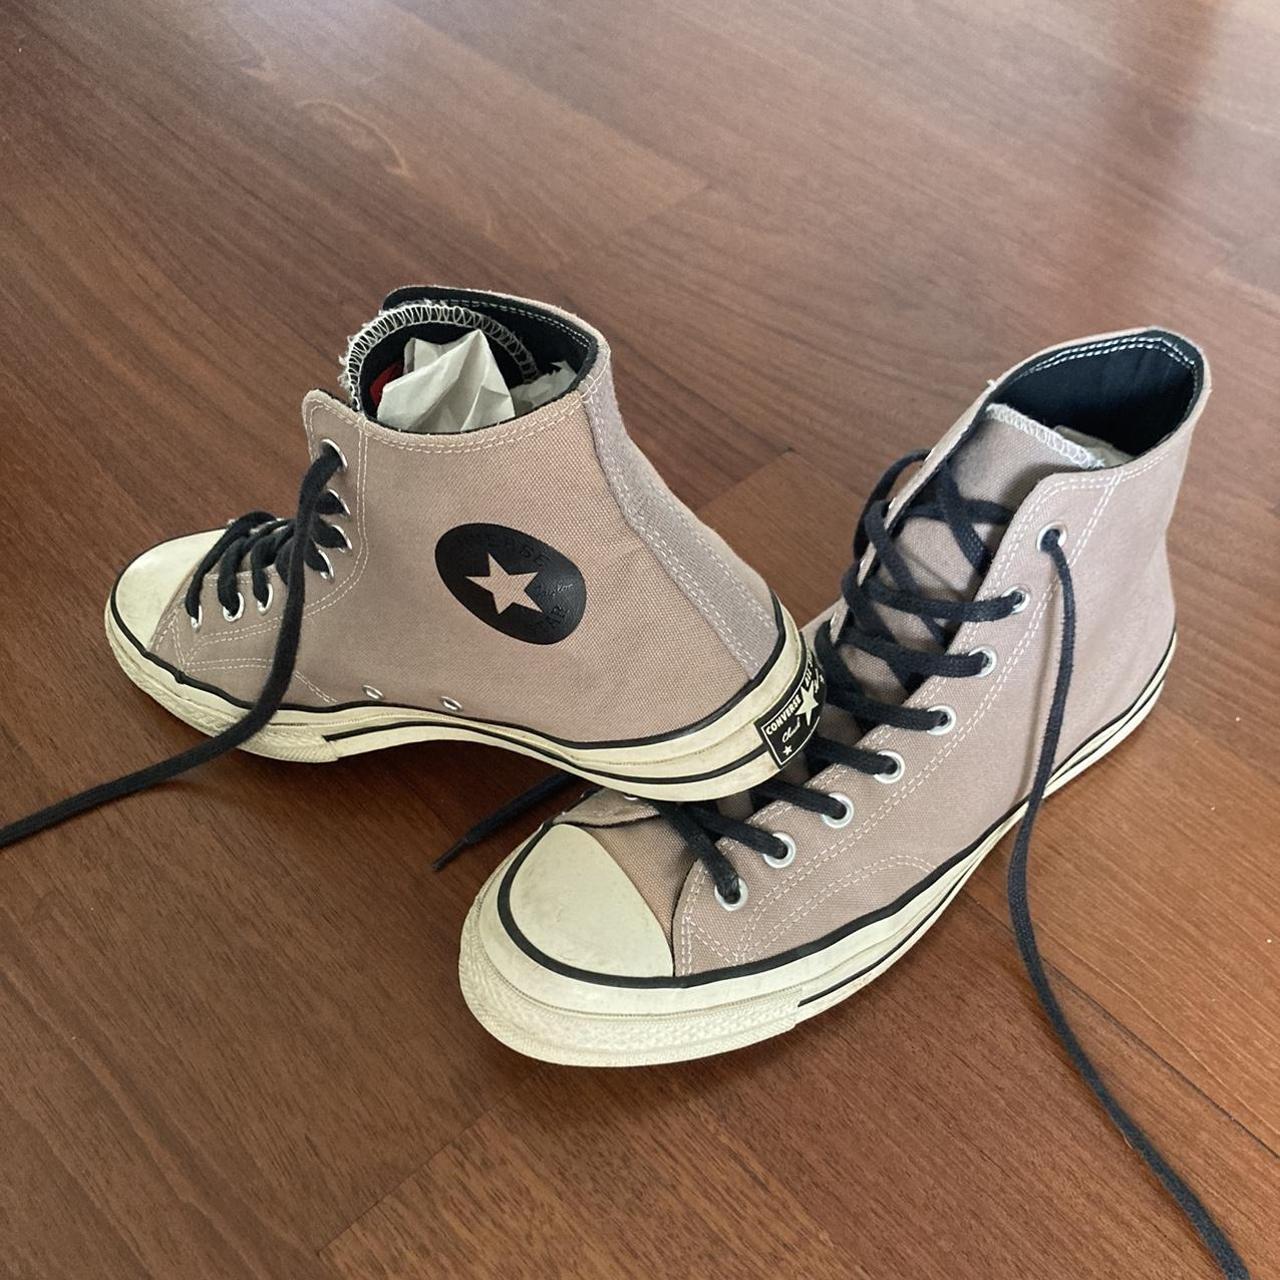 Converse Men's Grey and Black Trainers | Depop